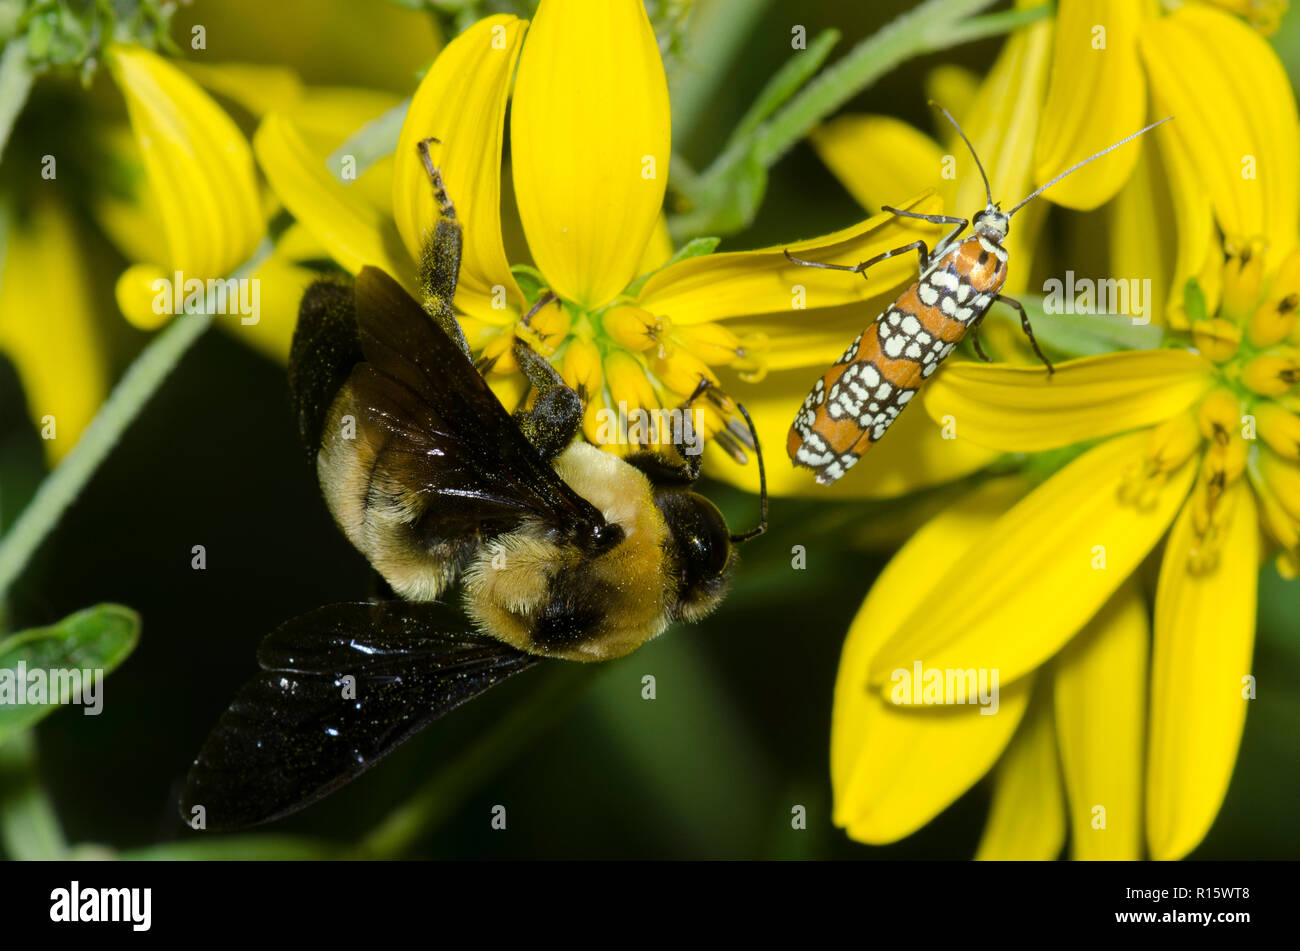 Southern Plains Bumble Bee, Bombus fraternus, and Ailanthus Webworm Moth, Atteva aurea, foraging on yellow composite flower Stock Photo